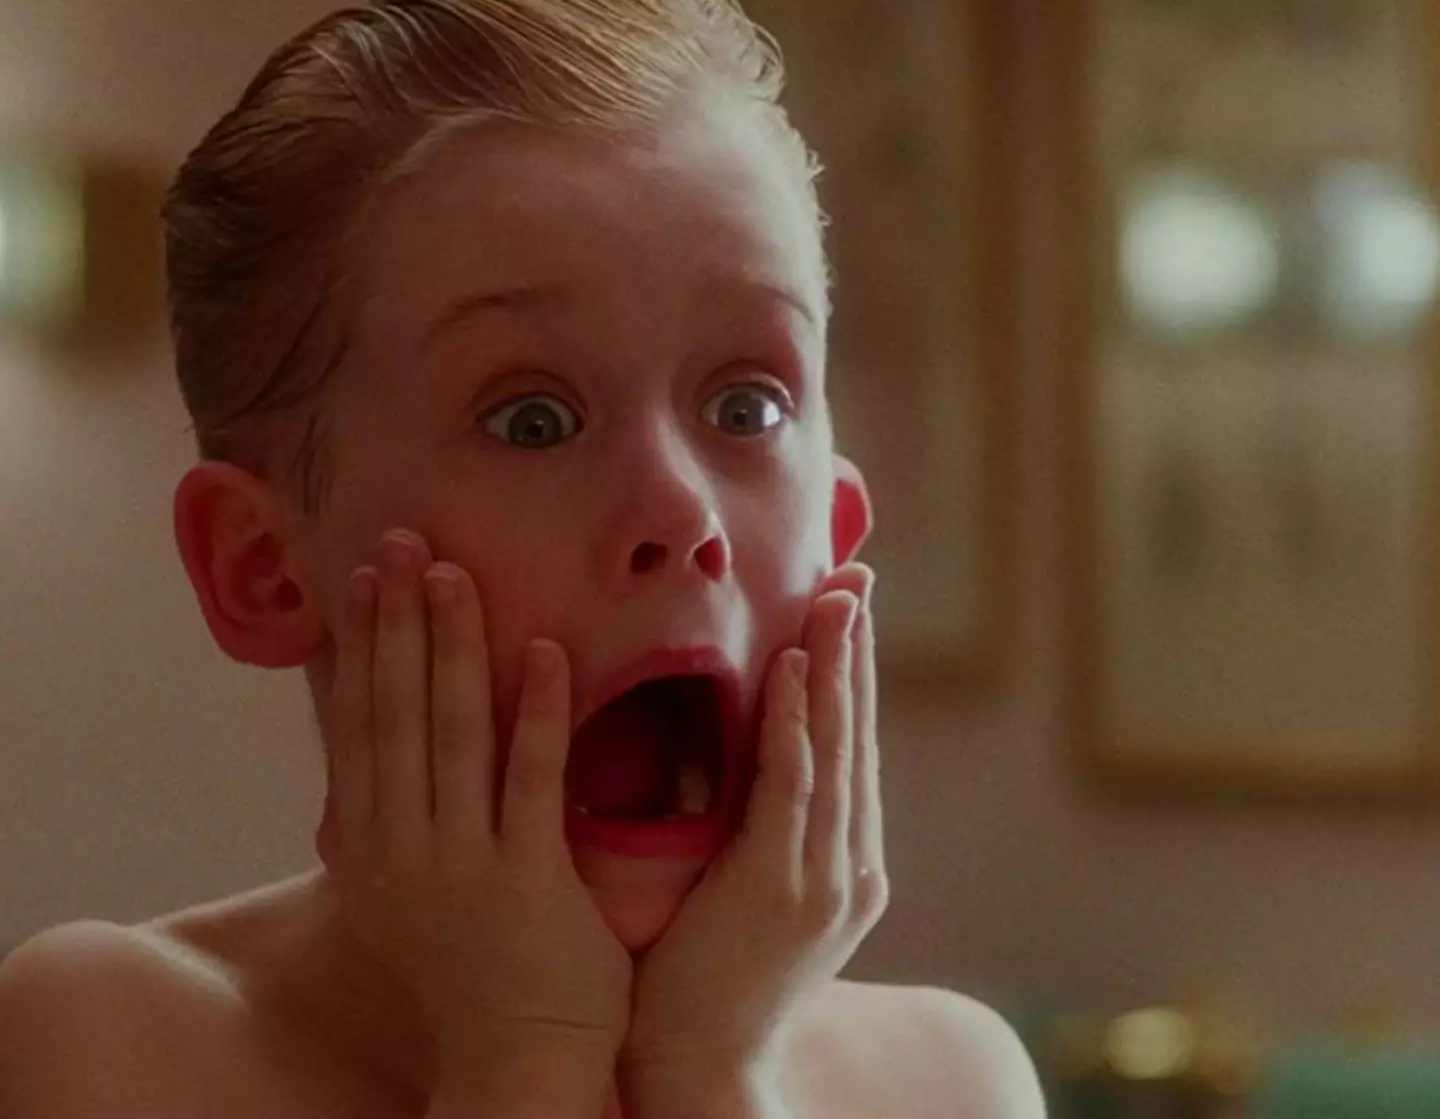 Home Alone fans can't believe they've only just clocked the exact reason Kevin doesn't make it on holiday with his family.